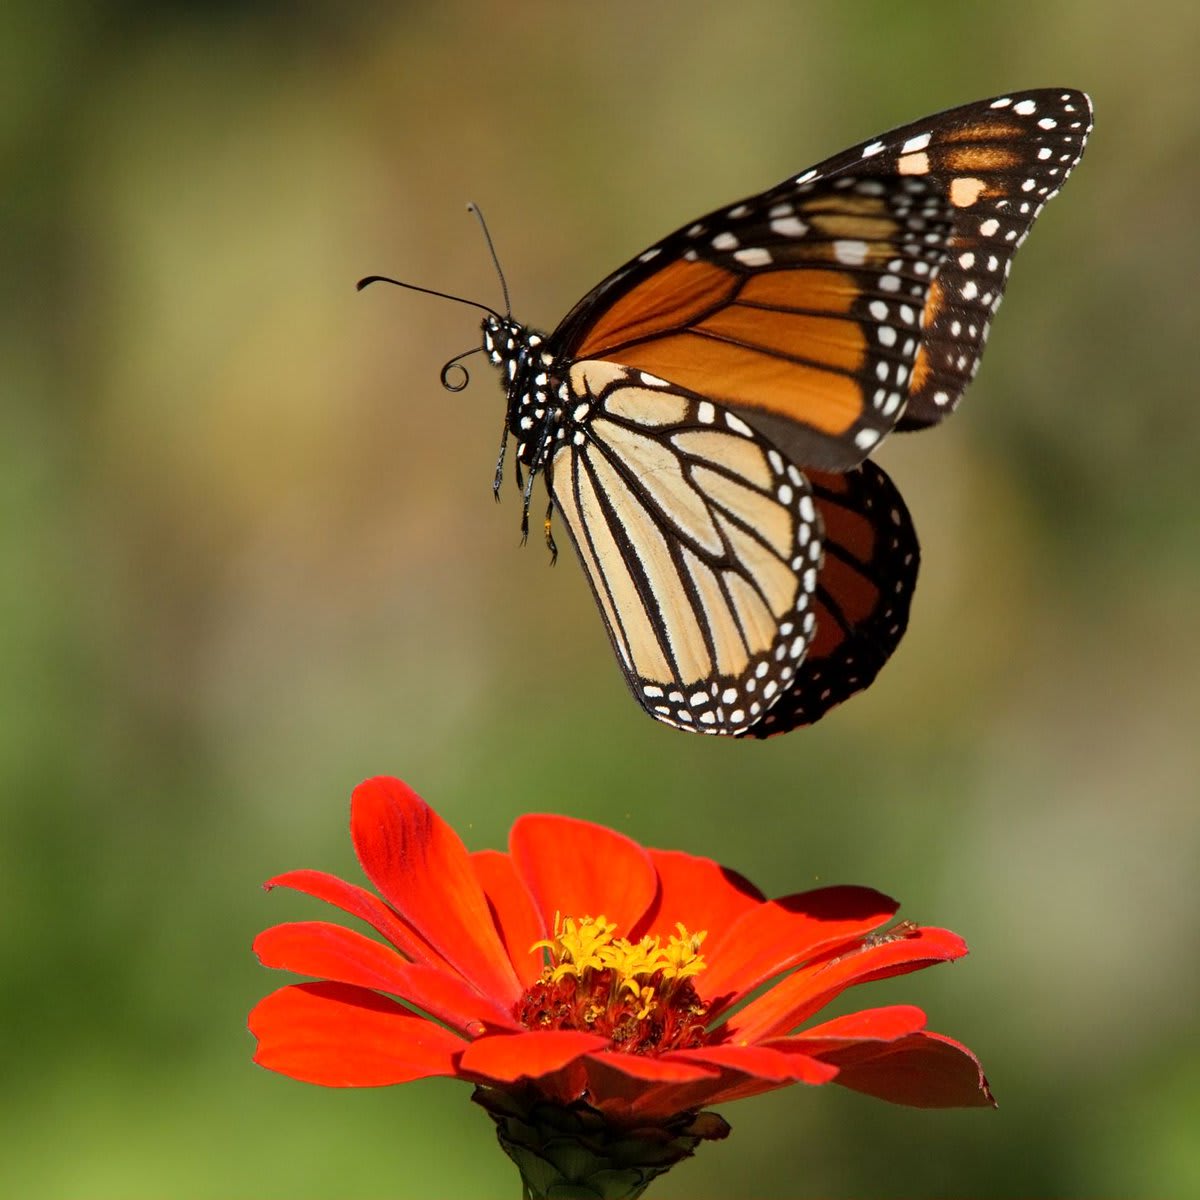 The large and brilliantly-colored monarch butterfly is among the most easily recognizable of the butterfly species. As caterpillars, they feed exclusively on the leaves of milkweed, wildflowers in the genus Asclepias. ✅ NWW KeepItWild Learn more 📲: